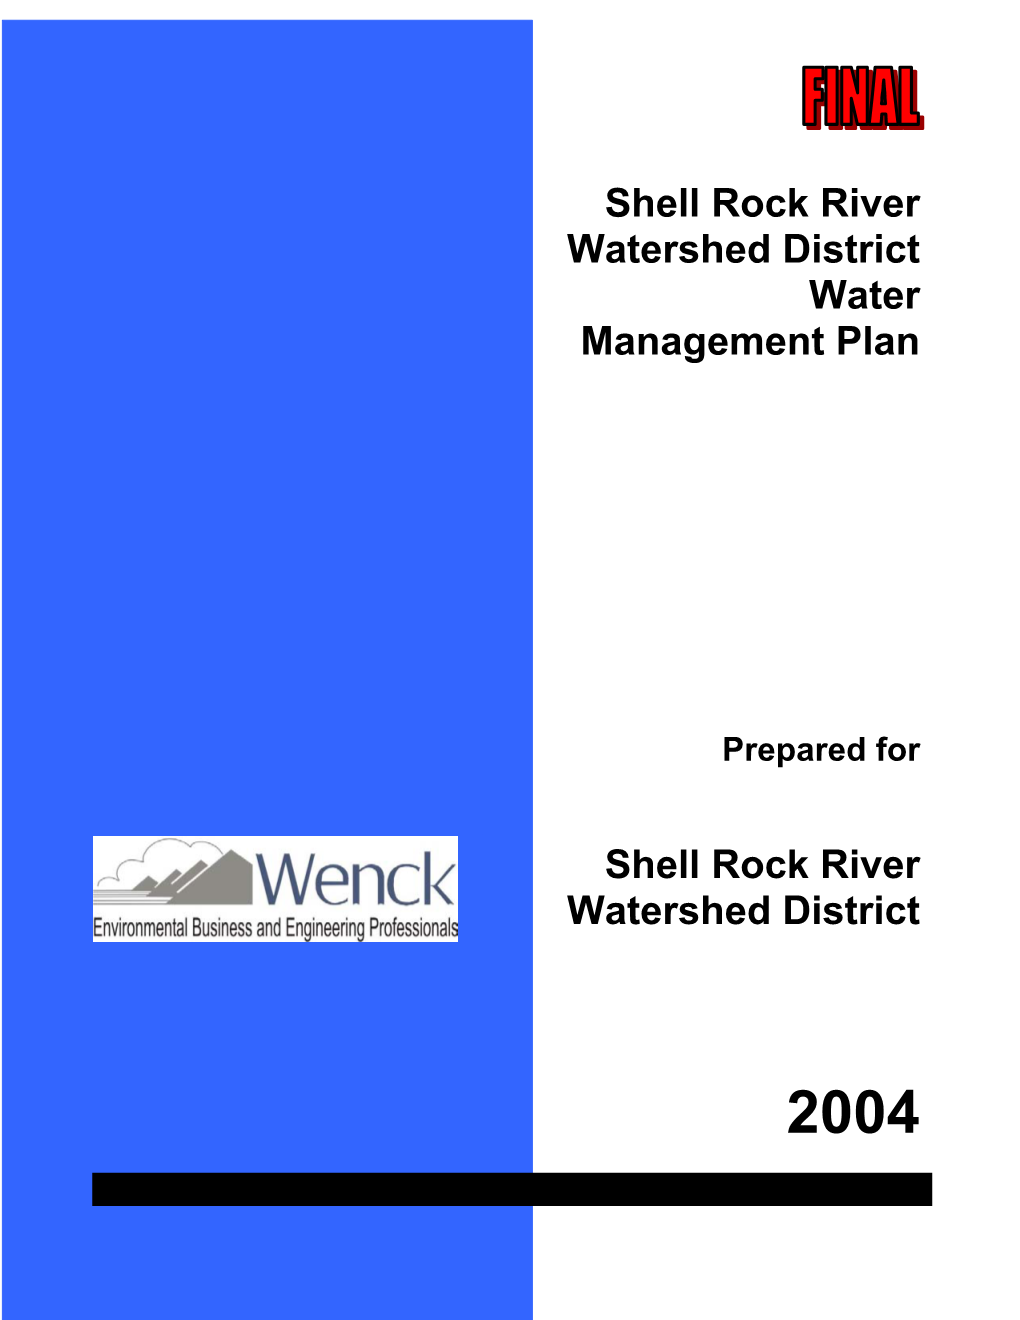 Shell Rock River Watershed 2004